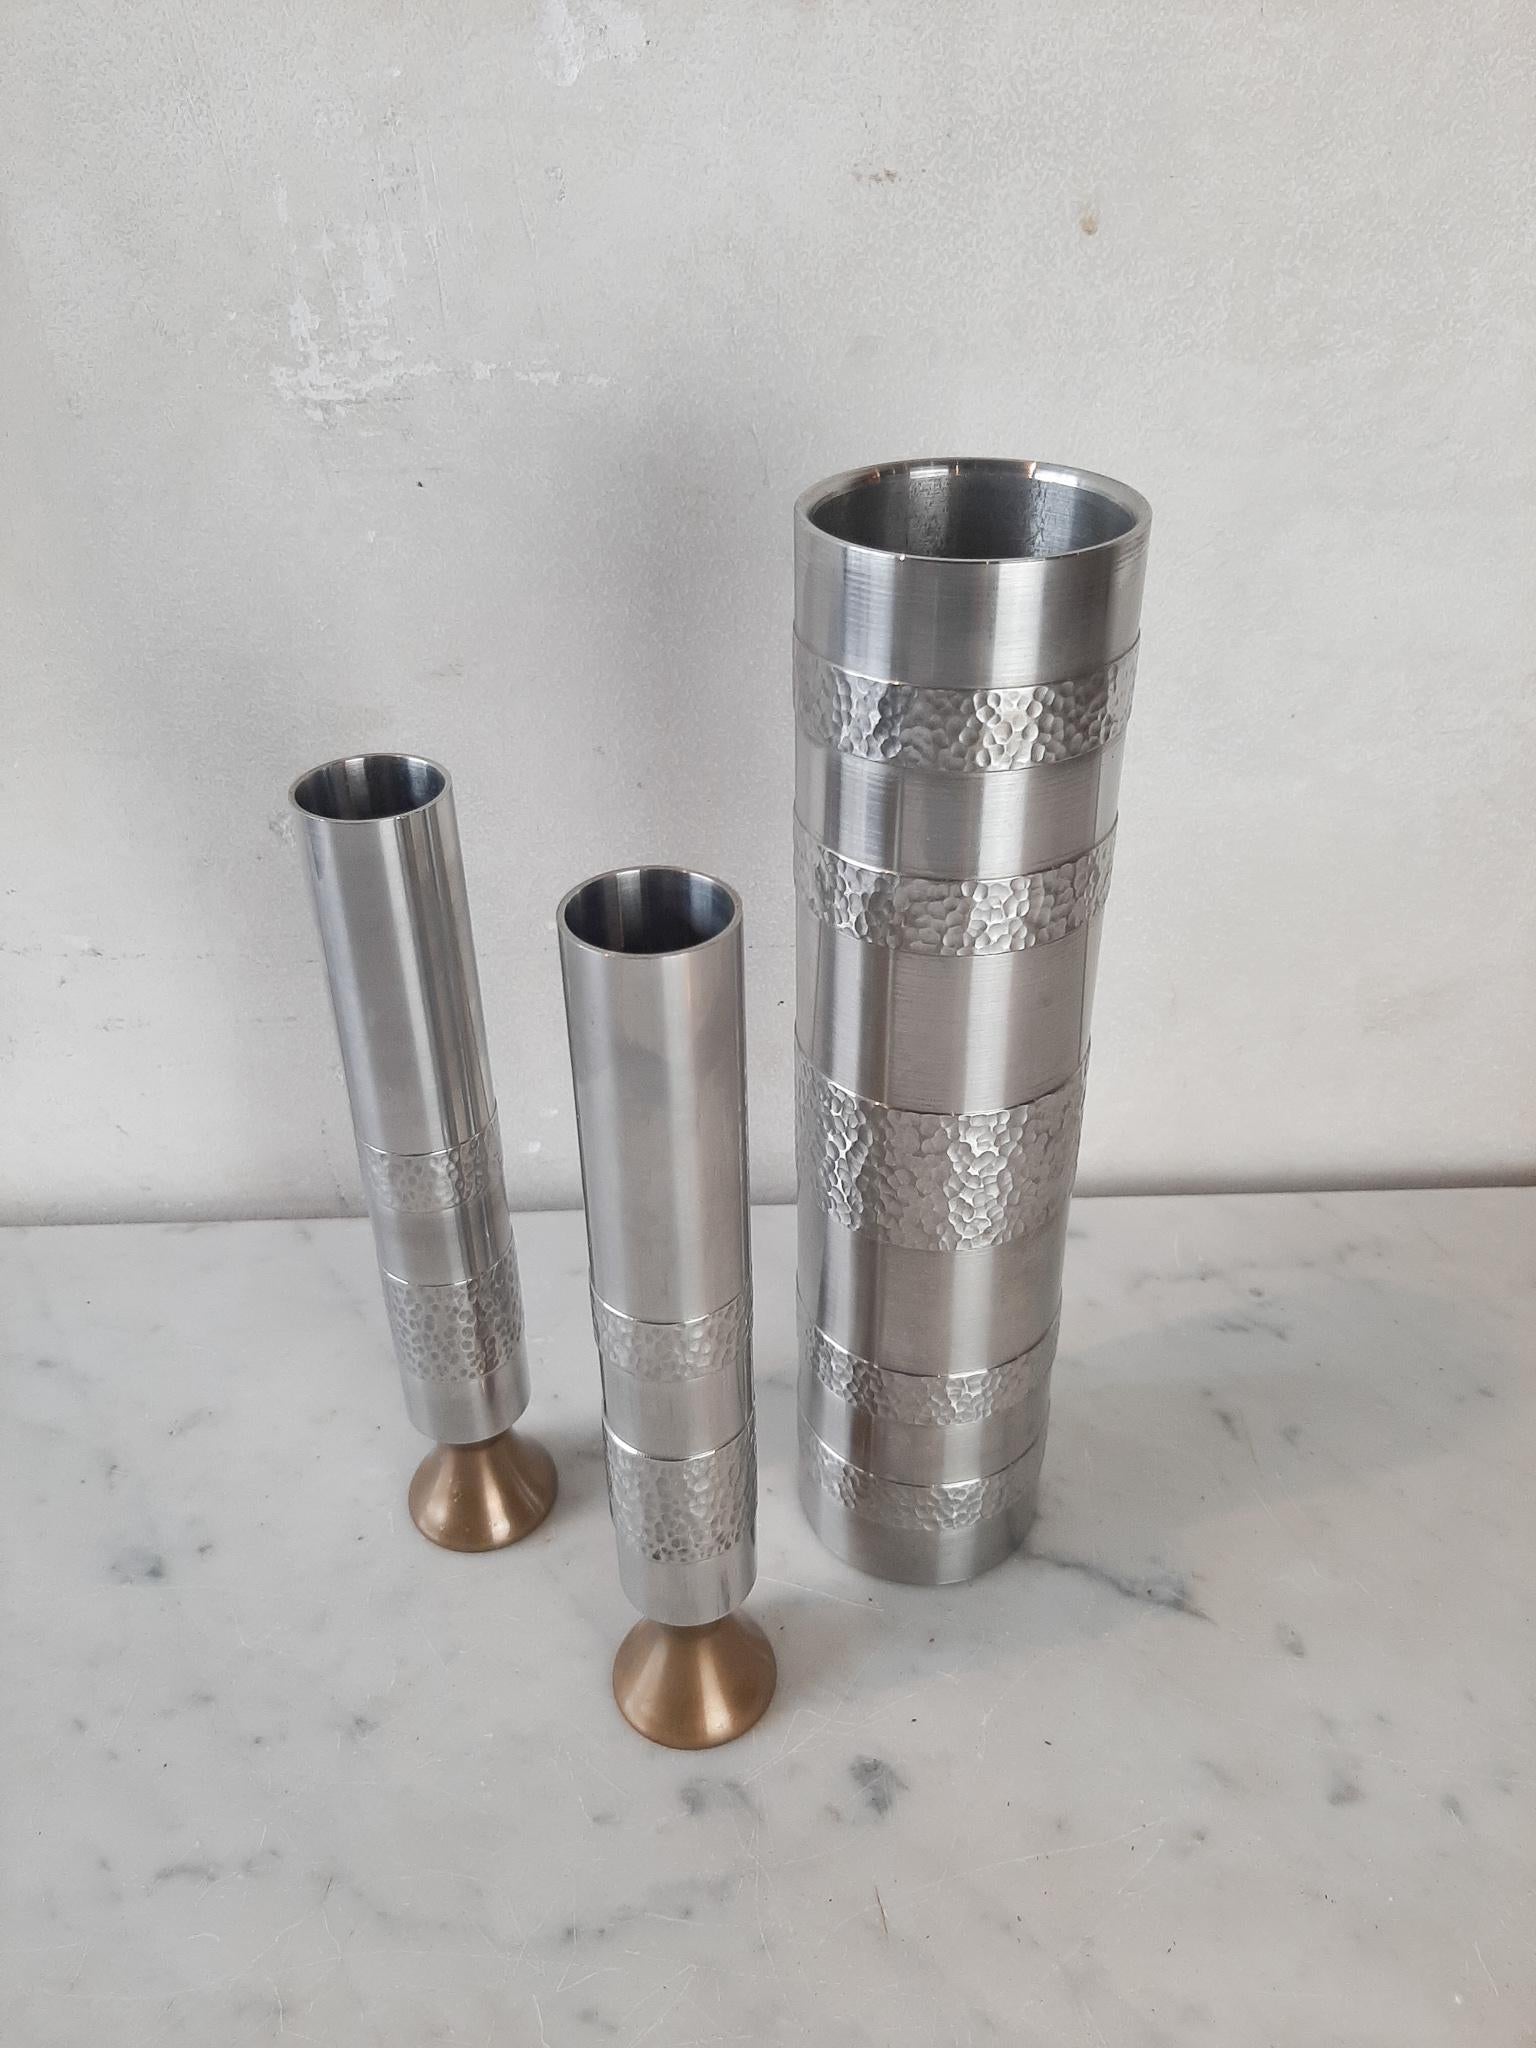 Hand-Crafted Set of Three Handmade Metal Brutalist Vases, Stainless Steel, Germany, 1970s For Sale